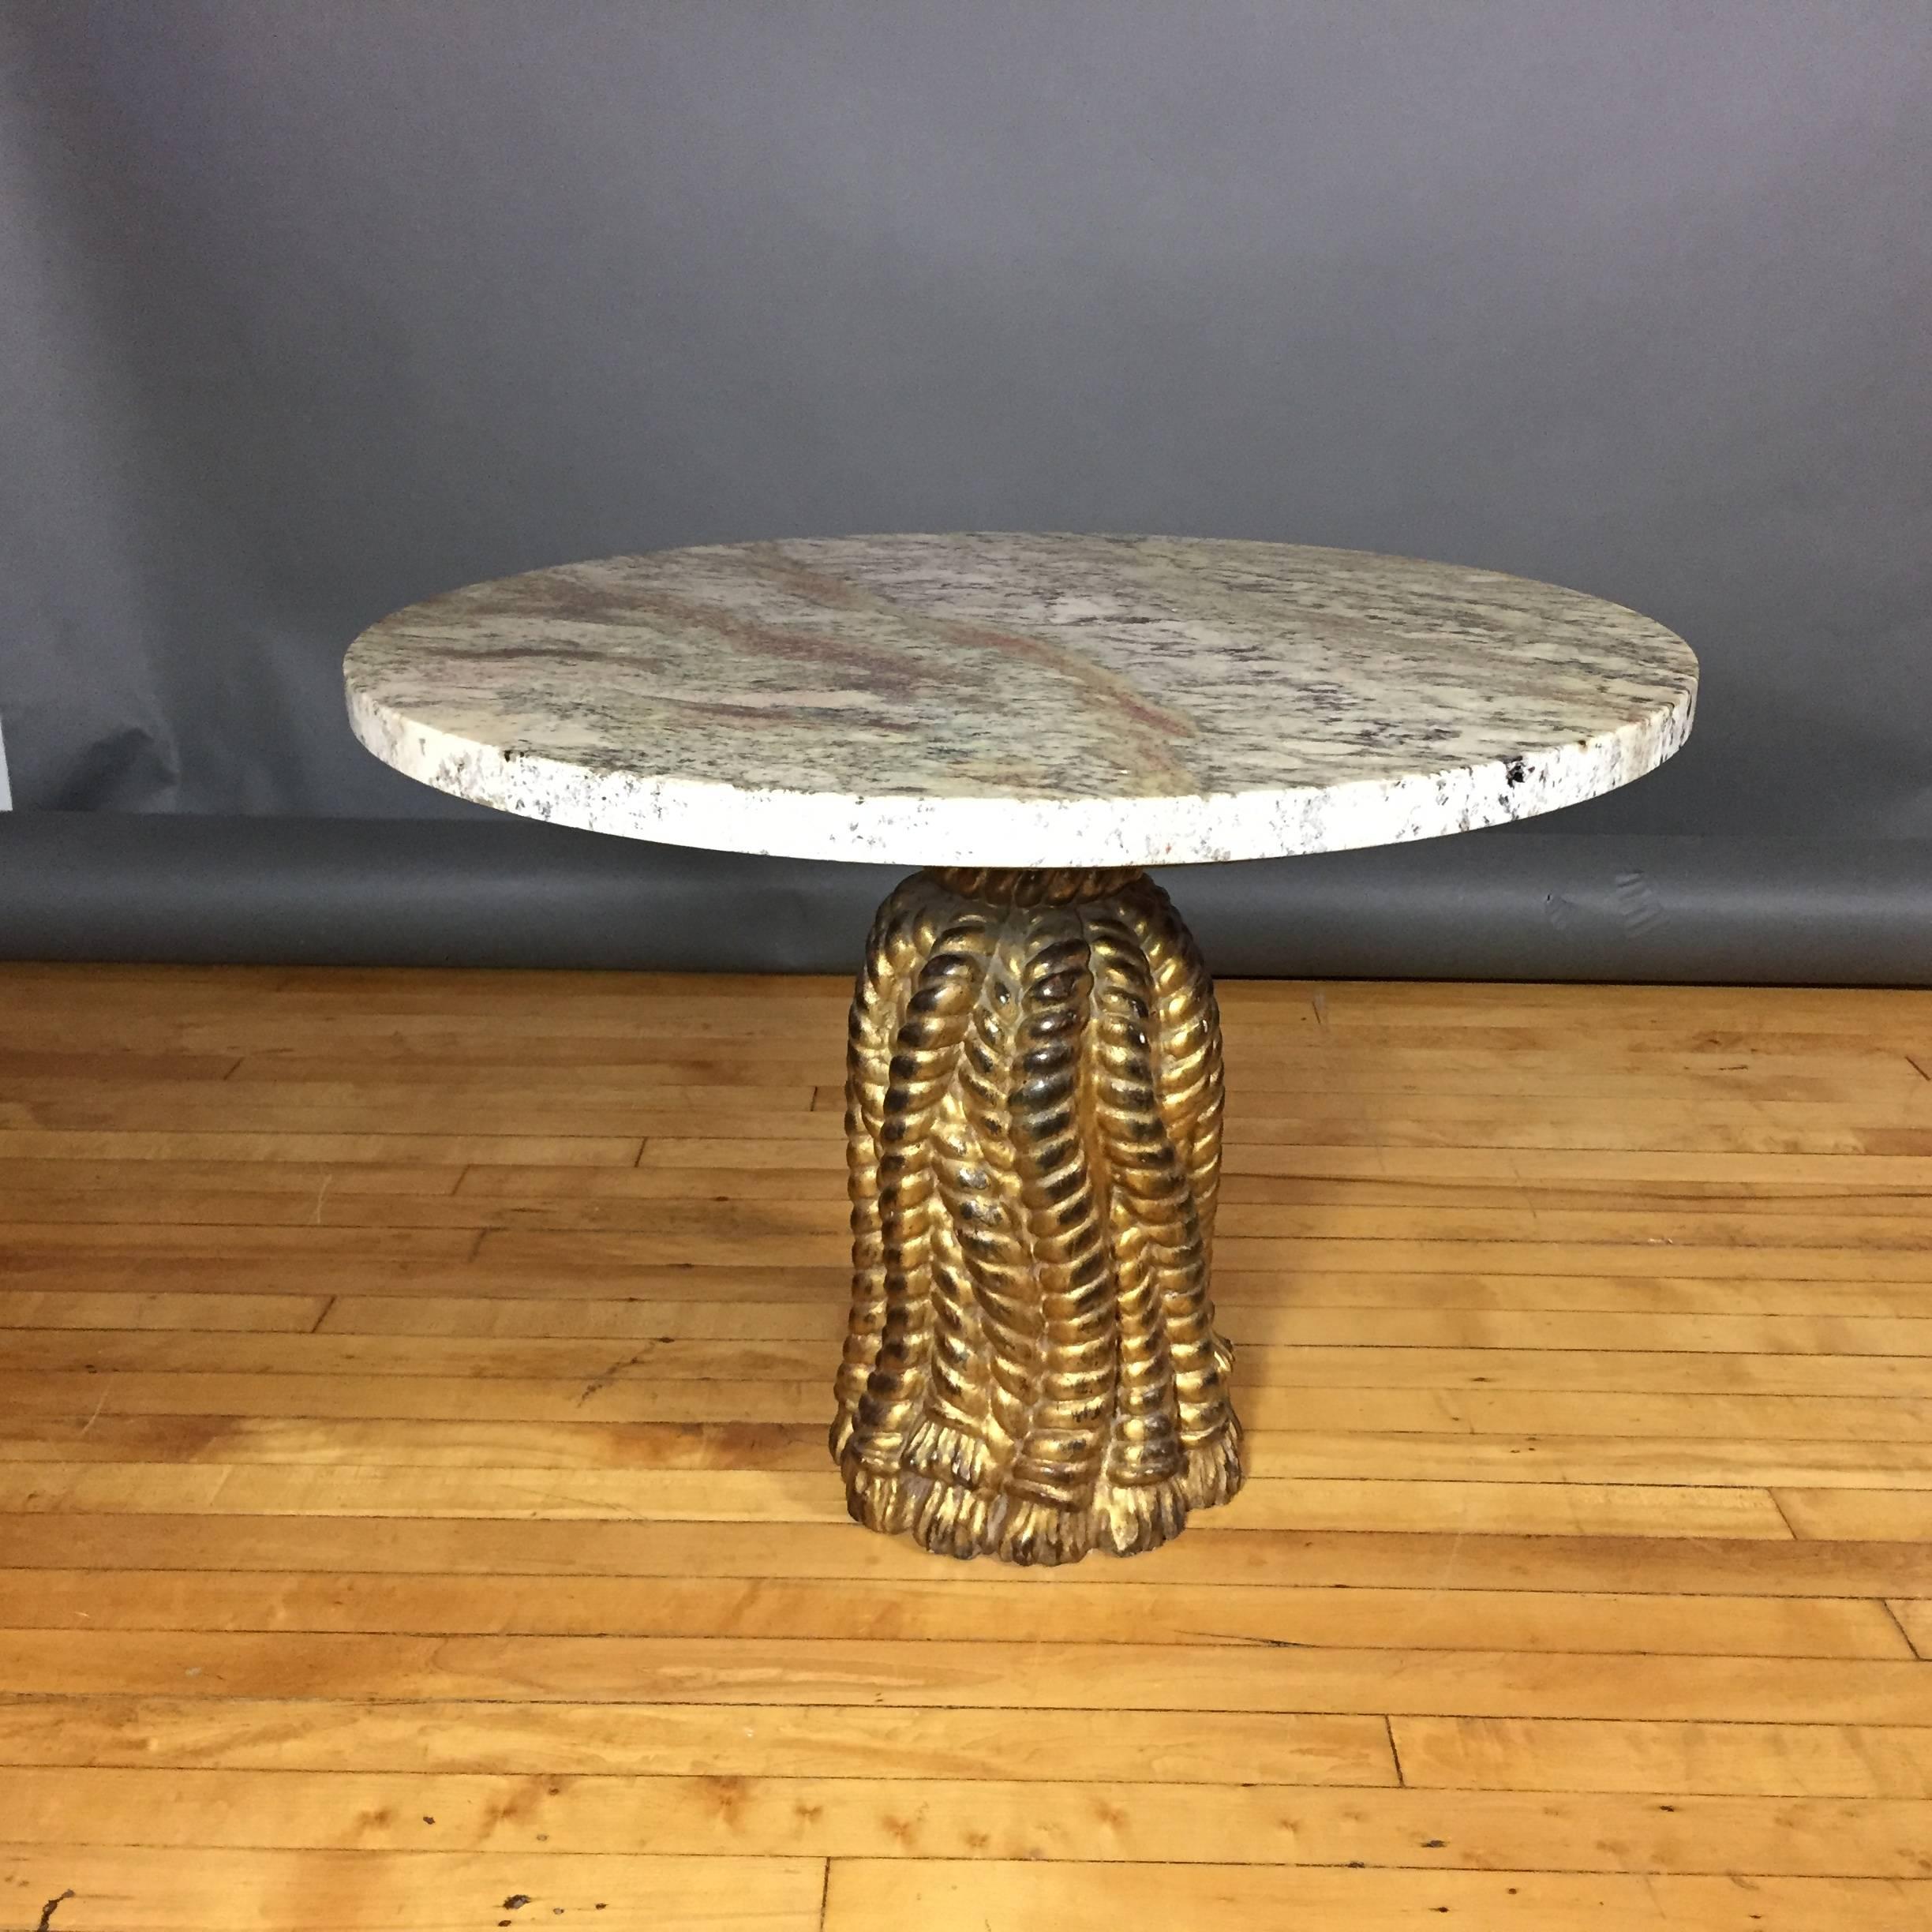 Elegant and humorous, this 1950s, Italian coffee table has a hand-carved and gilt base in the shape of a series of large gathered rope tassels. Original marble base recently replaced with gorgeous new Italian marble.